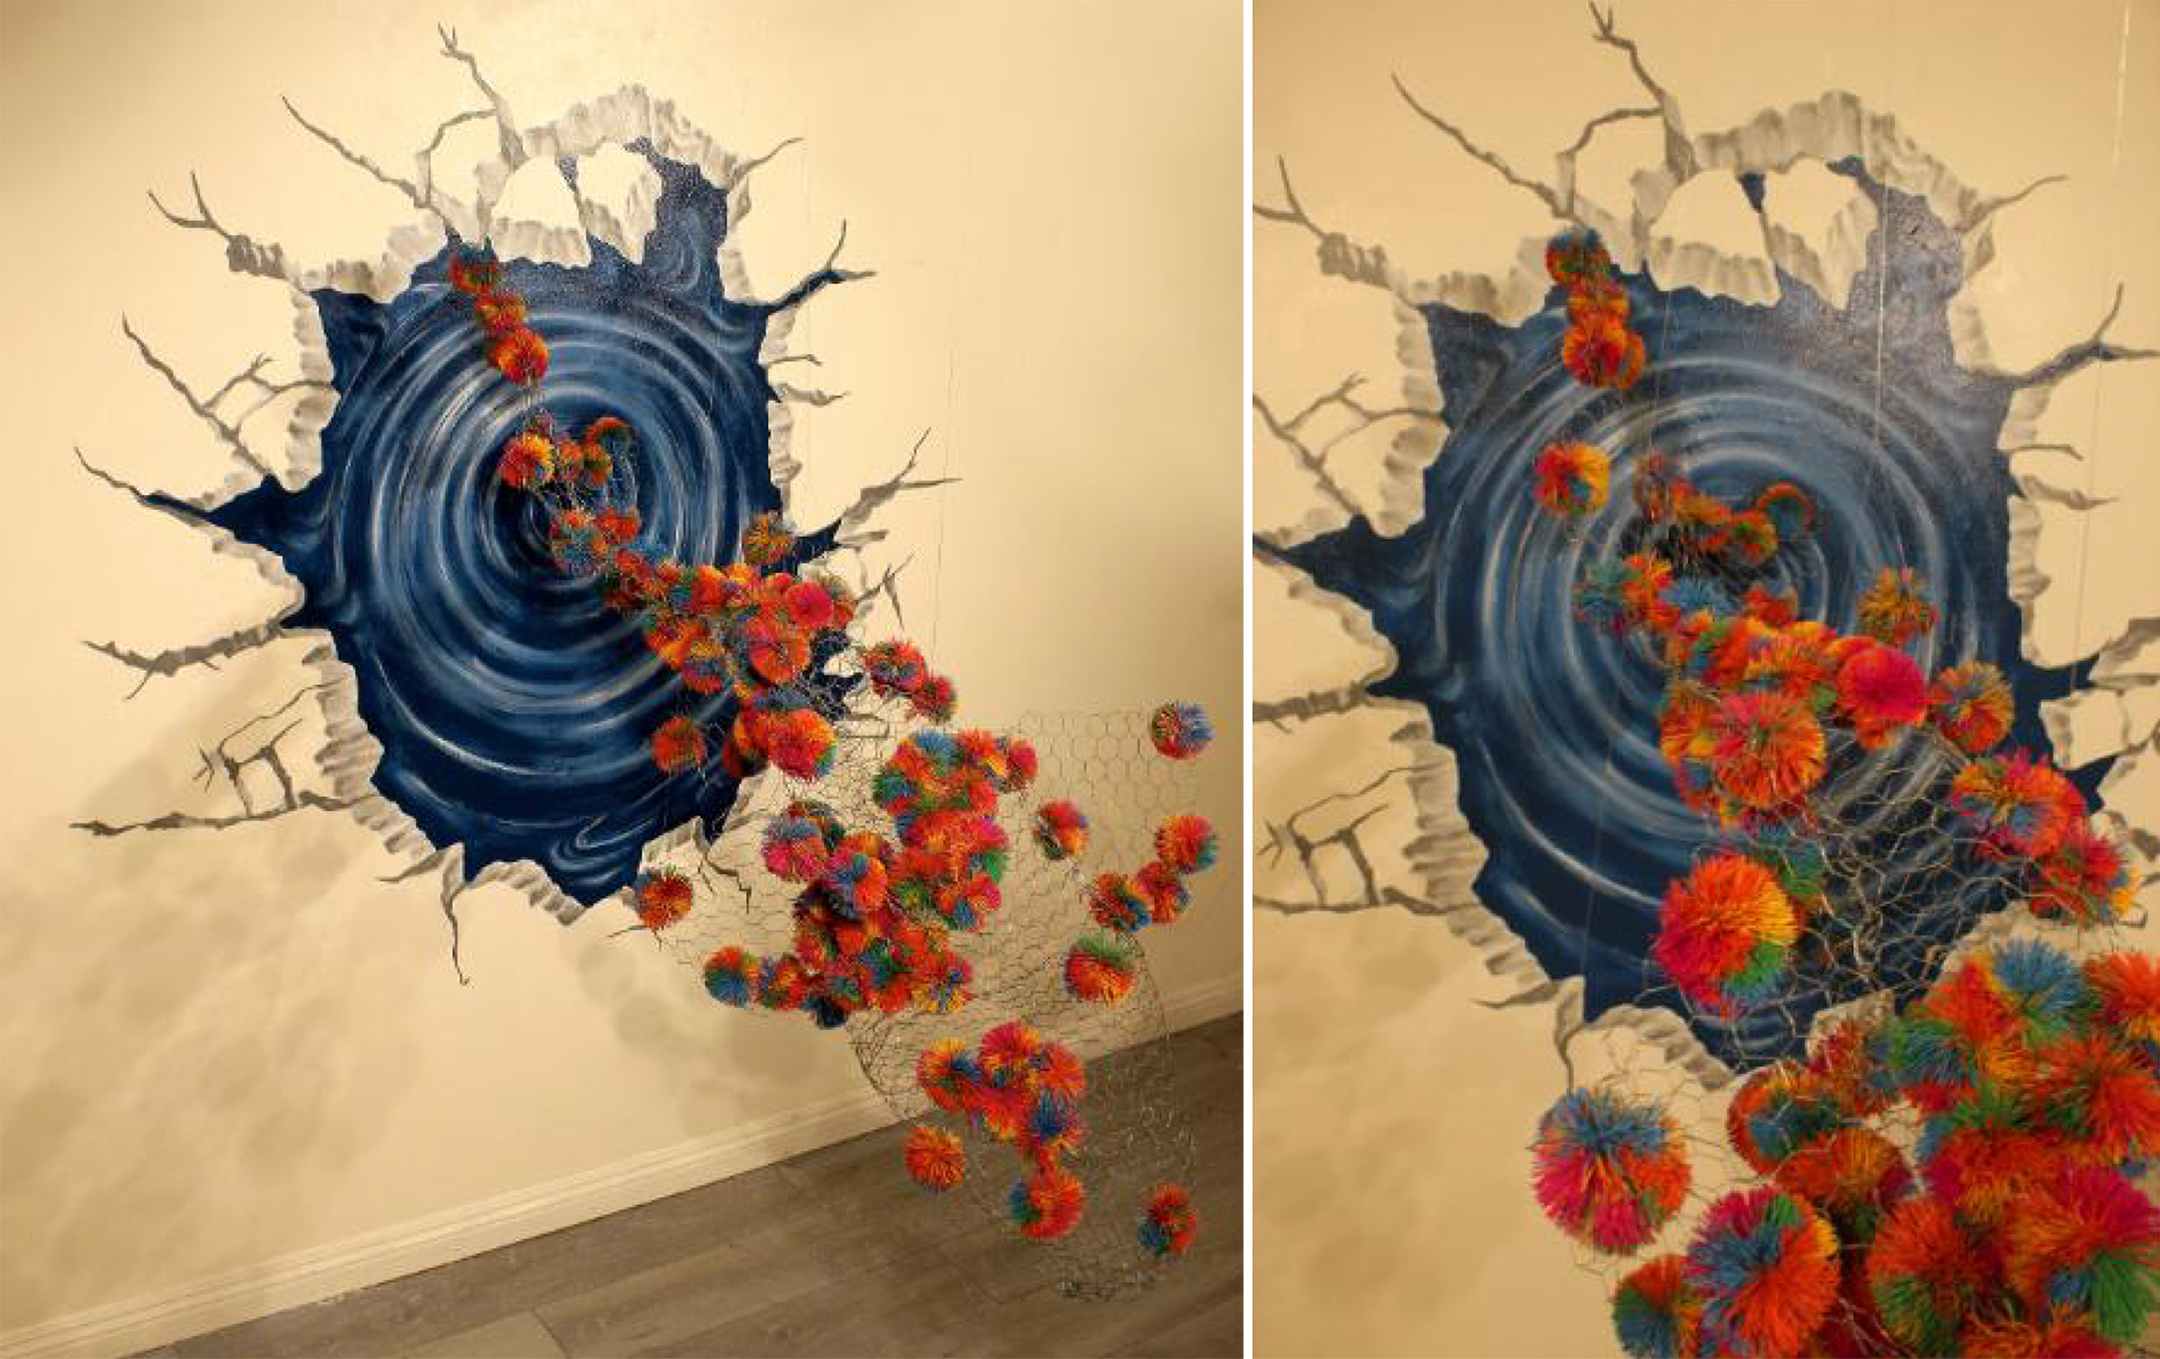 Two photos showing views of a sculpture of red balls coming out of a portion of a wall painted blue